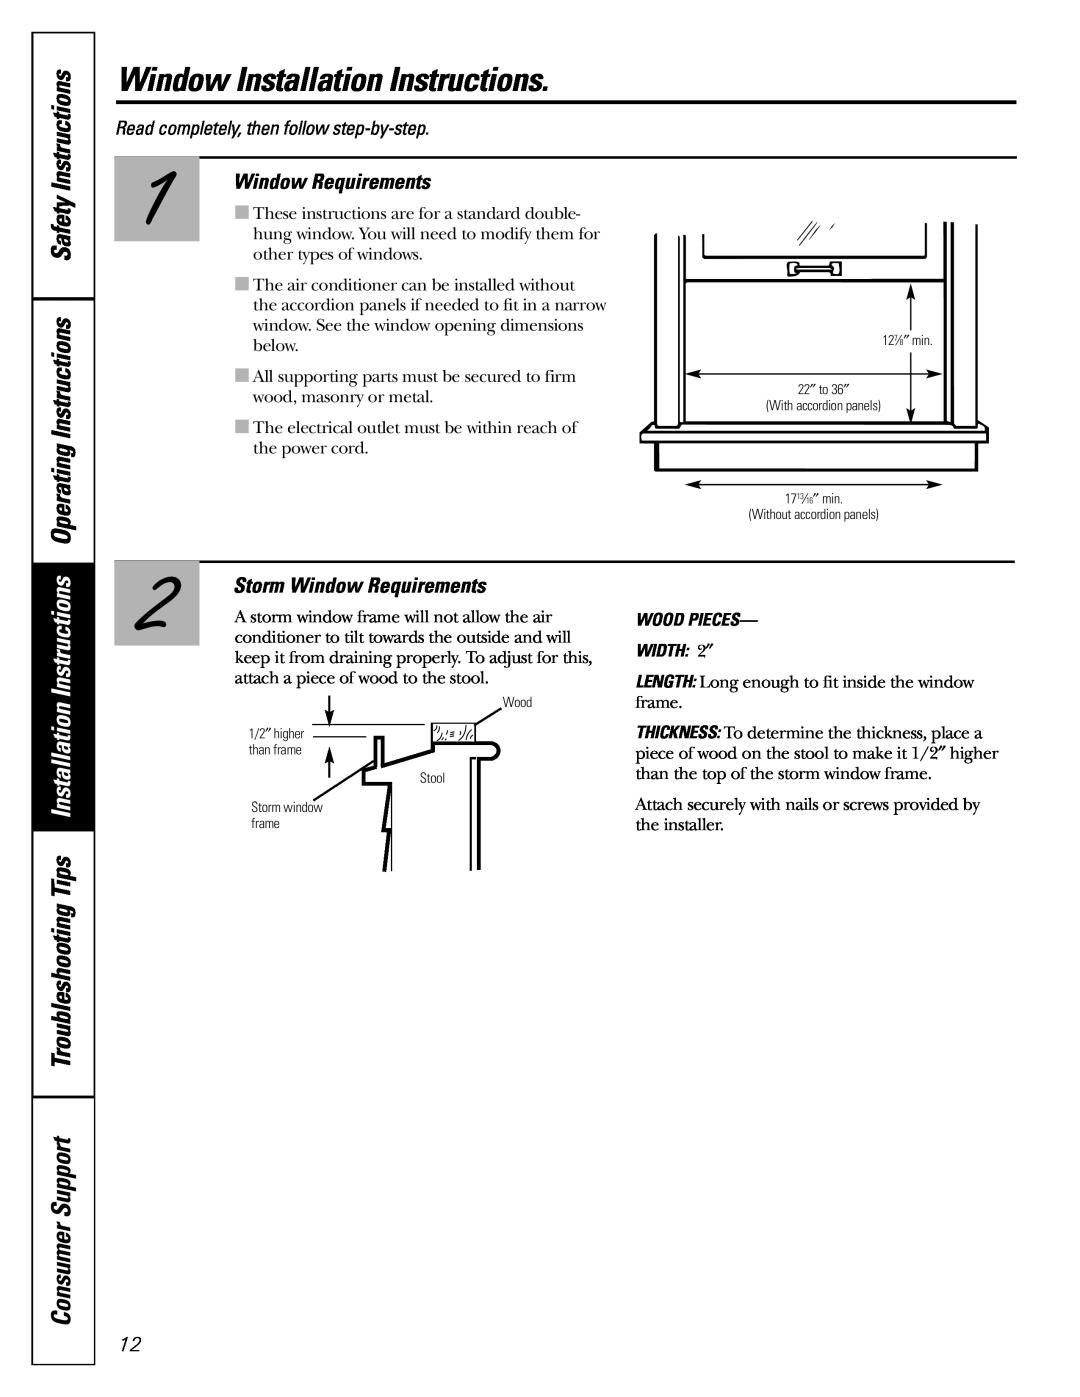 GE ASR05 Operating Instructions Safety, Window Installation Instructions, Storm Window Requirements 